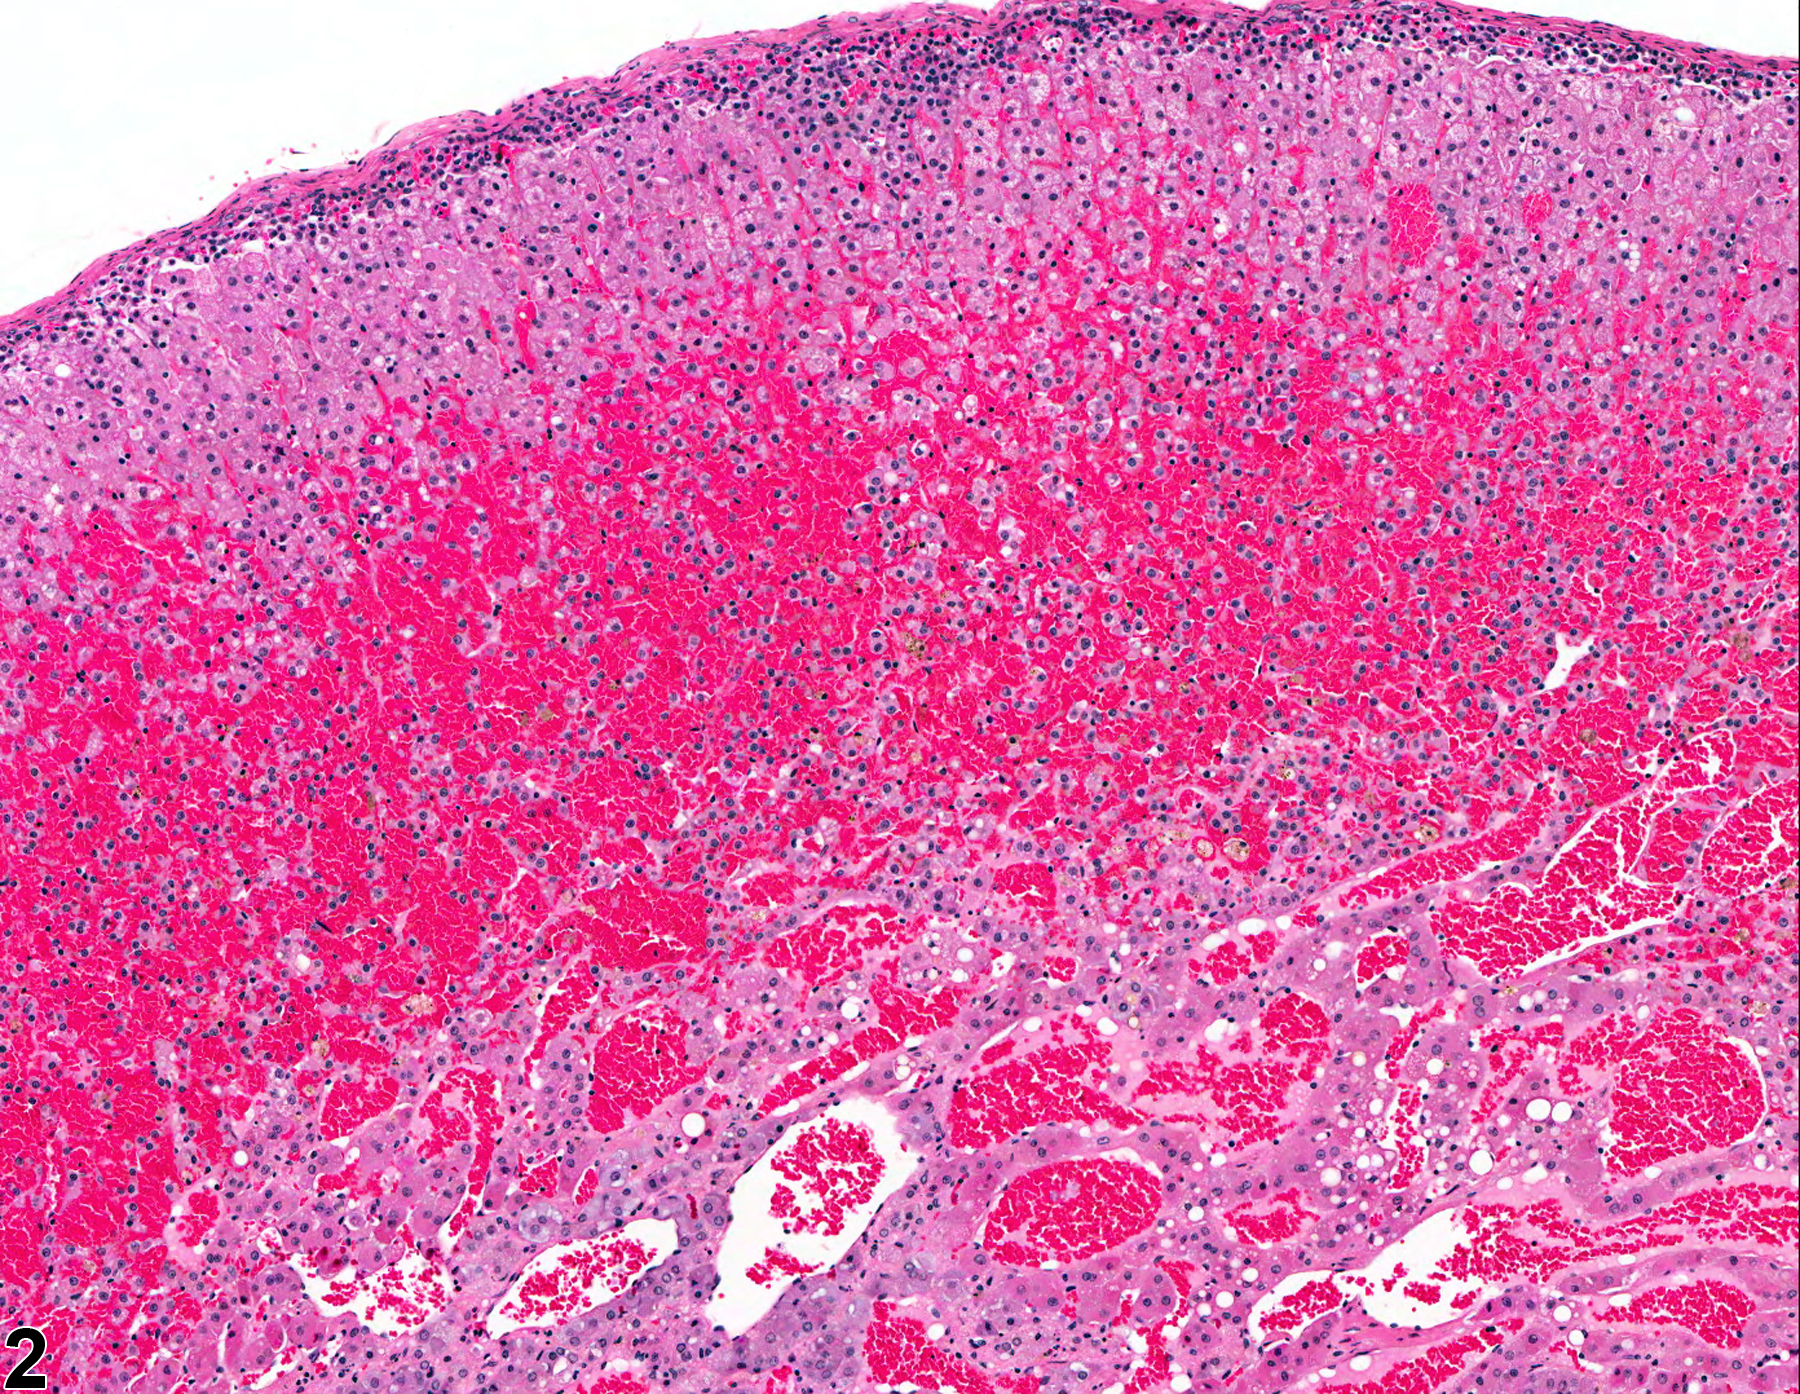 Image of hemorrhage in the adrenal gland from a female F344/N rat in a chronic study